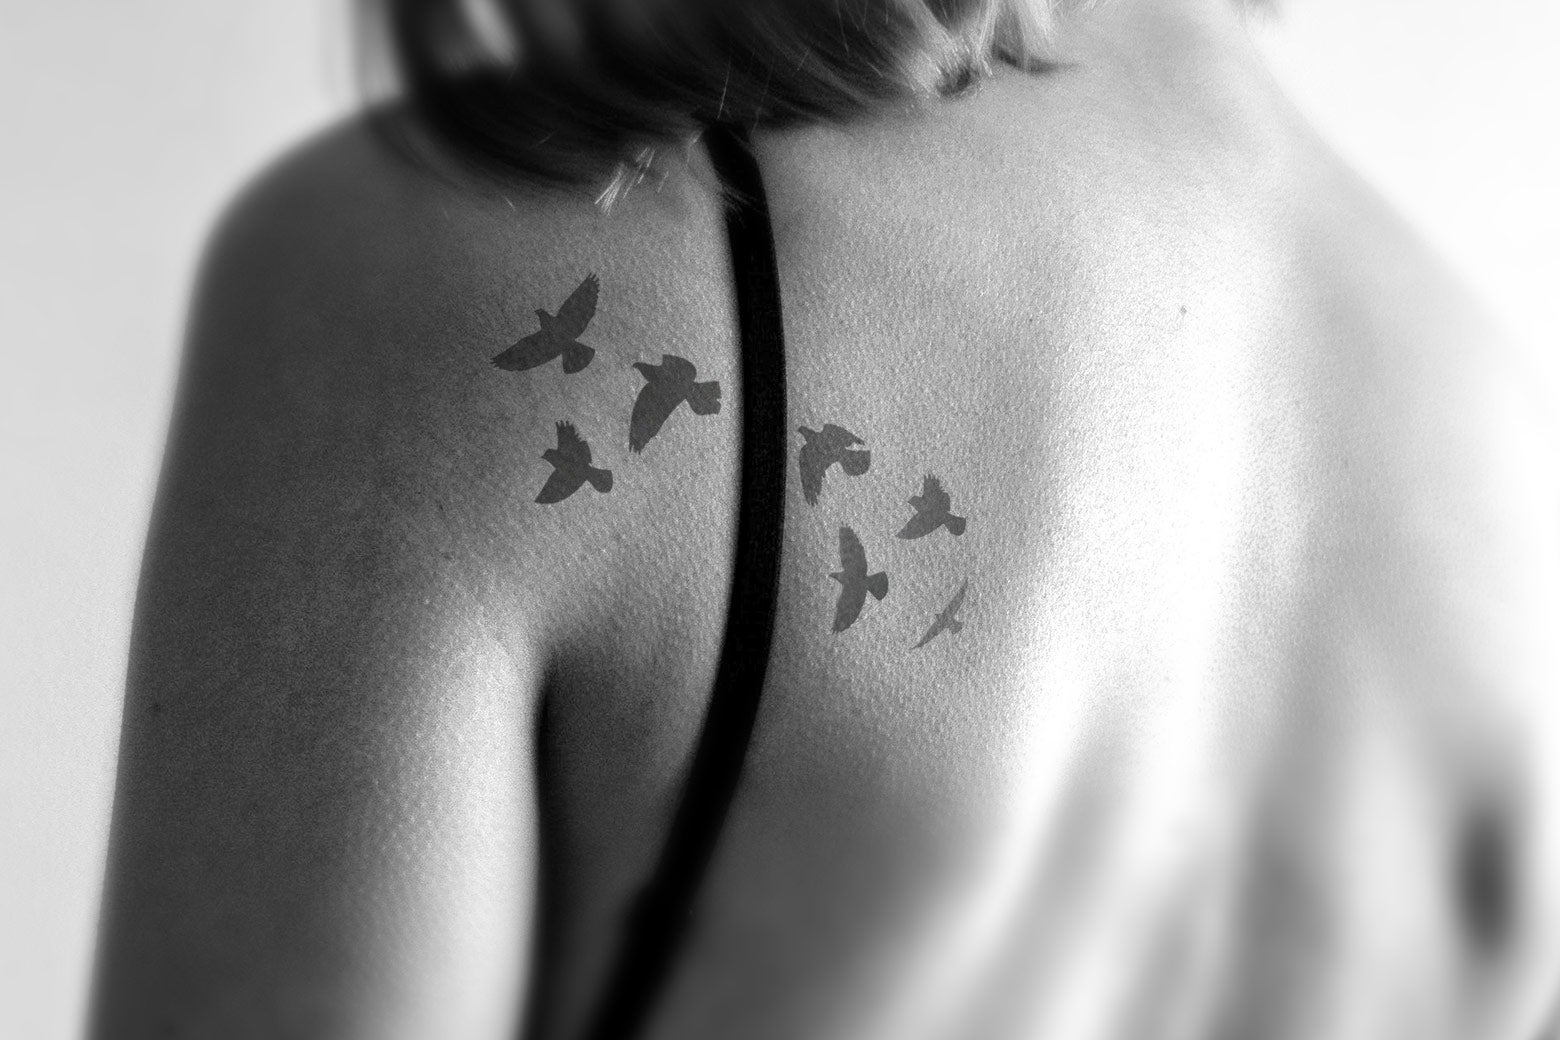 A woman with a tattoo on her shoulder of seven blackbirds.